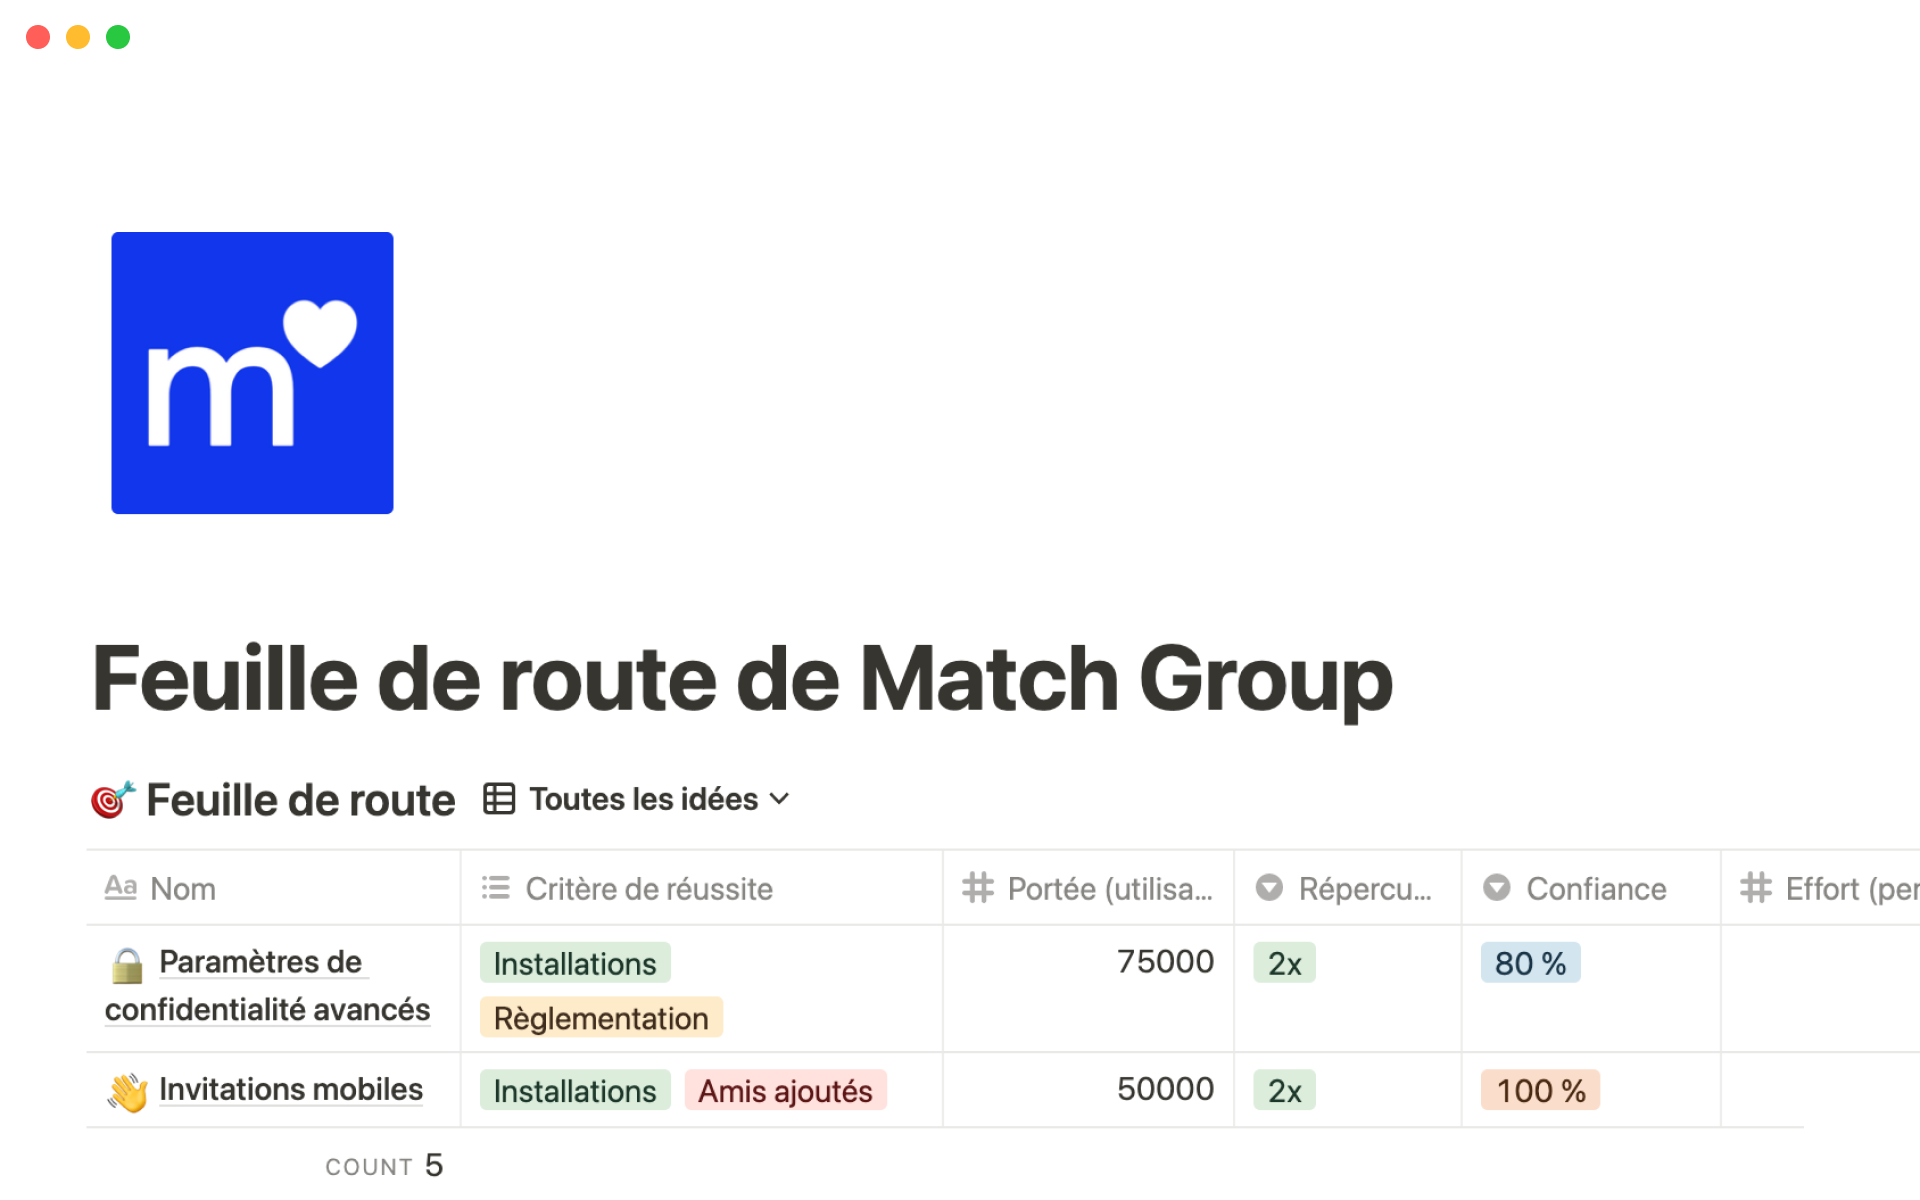 The desktop image for the Match Group's roadmap template